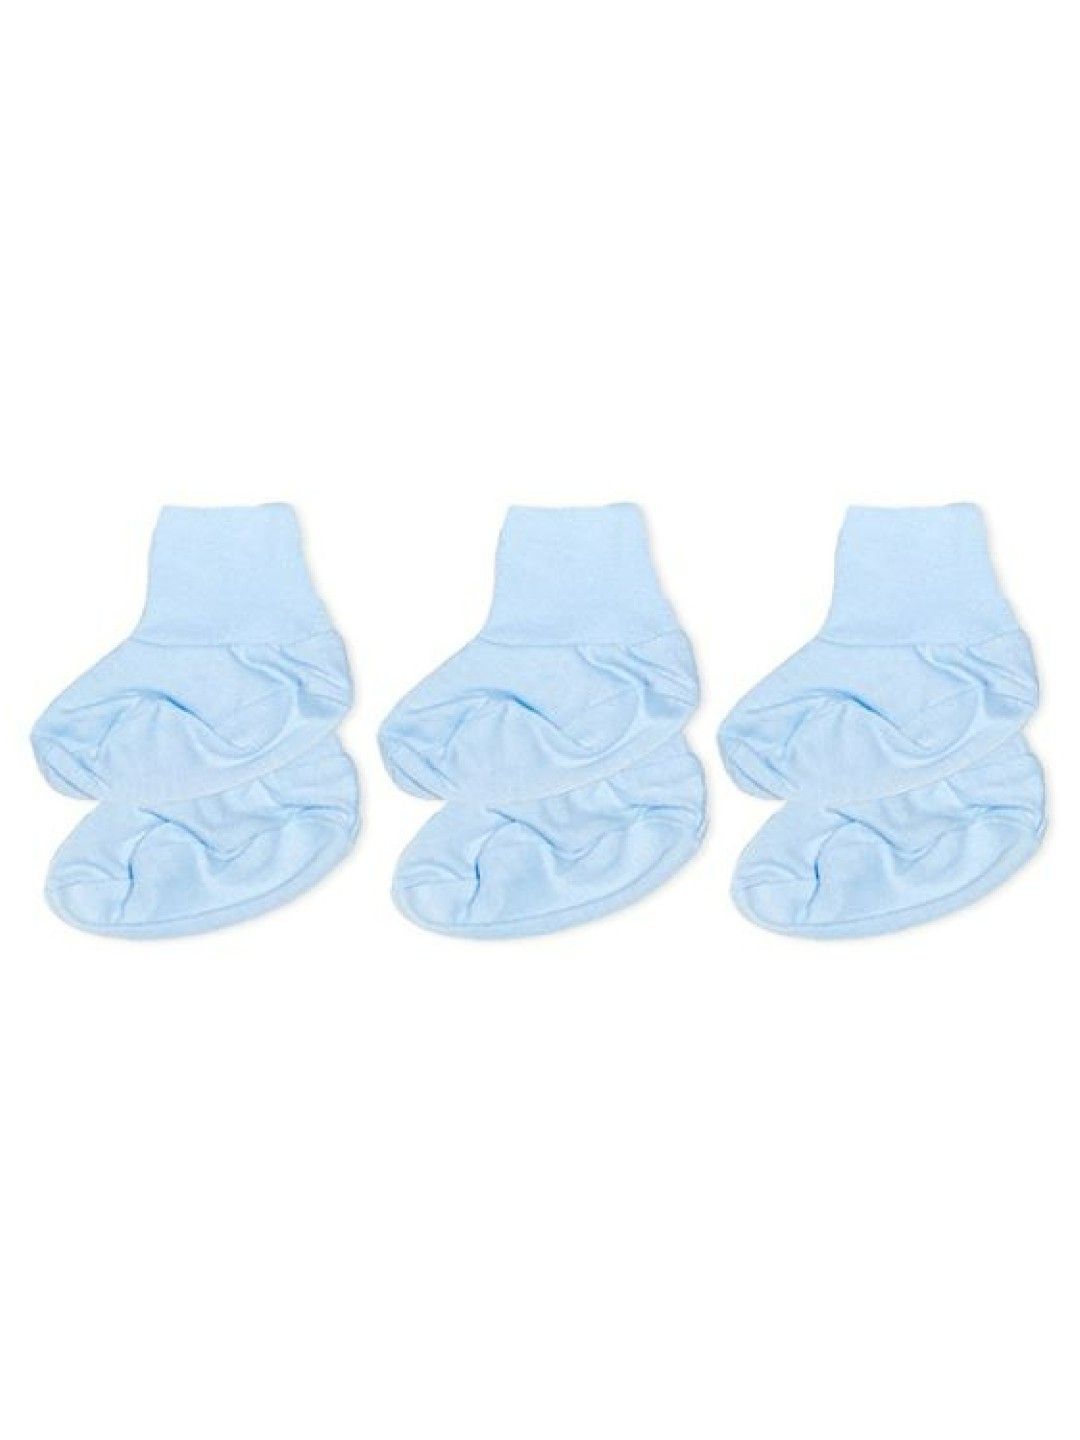 Cotton Central™ Booties 100% USA Cotton (Pack of 3)